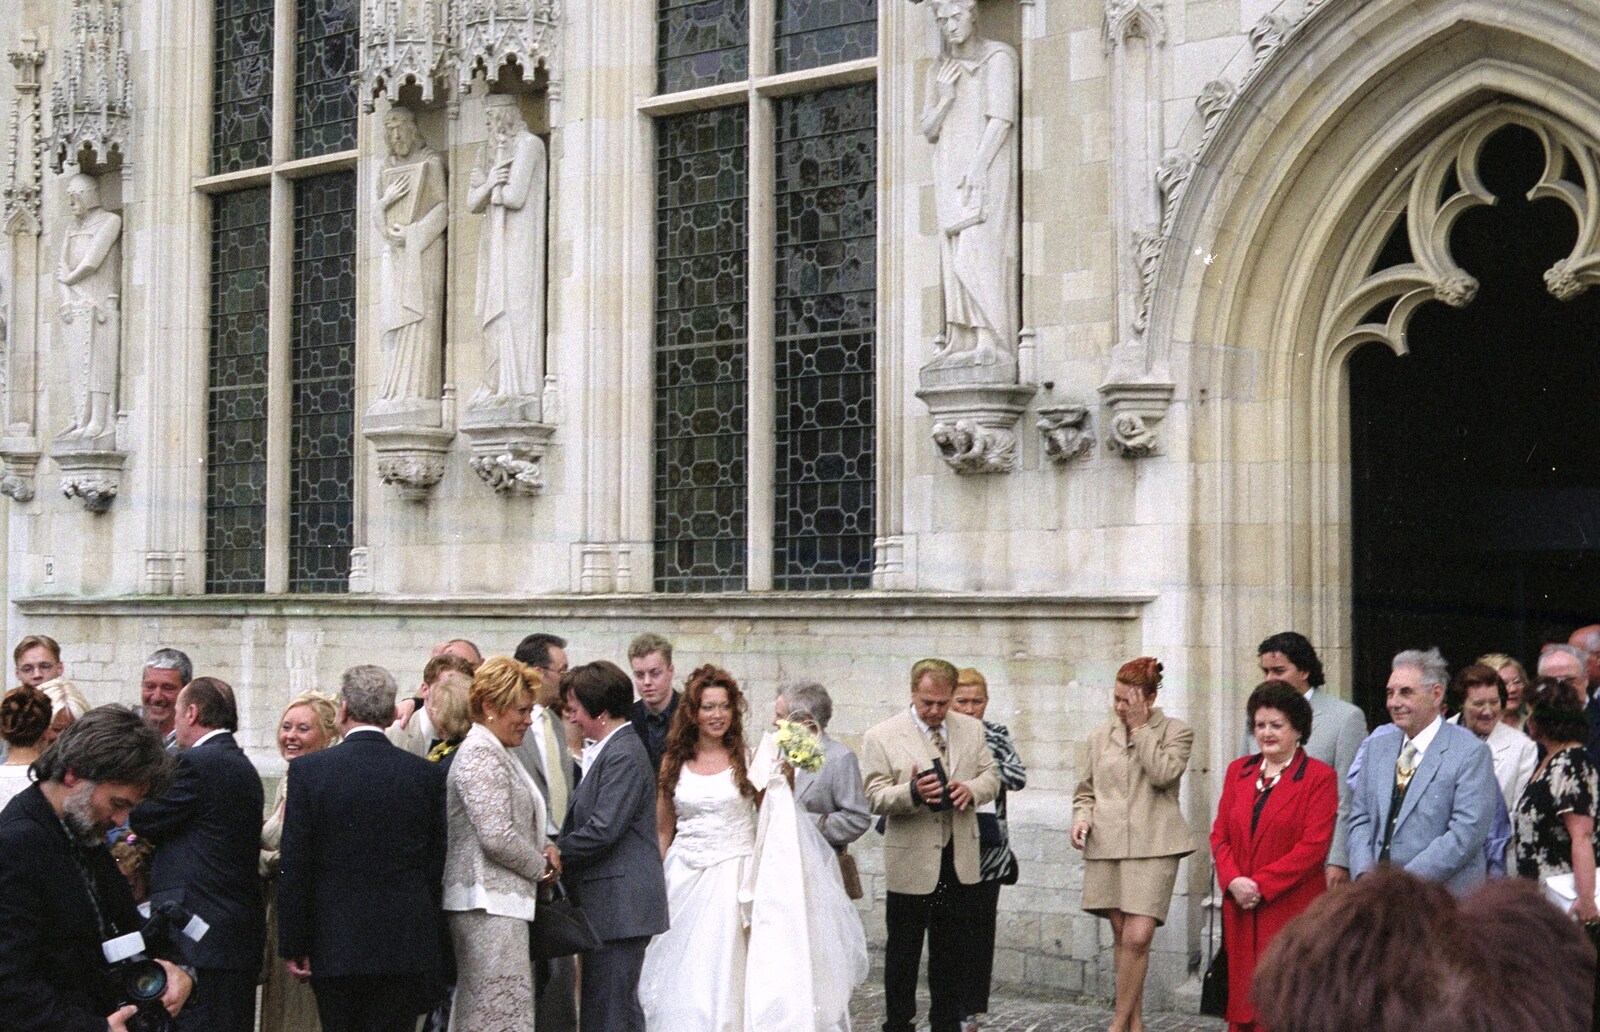 A Bruges wedding occurs from CISU: An SCC Day-Trip to Bruges, Belgium - 26th May 2000